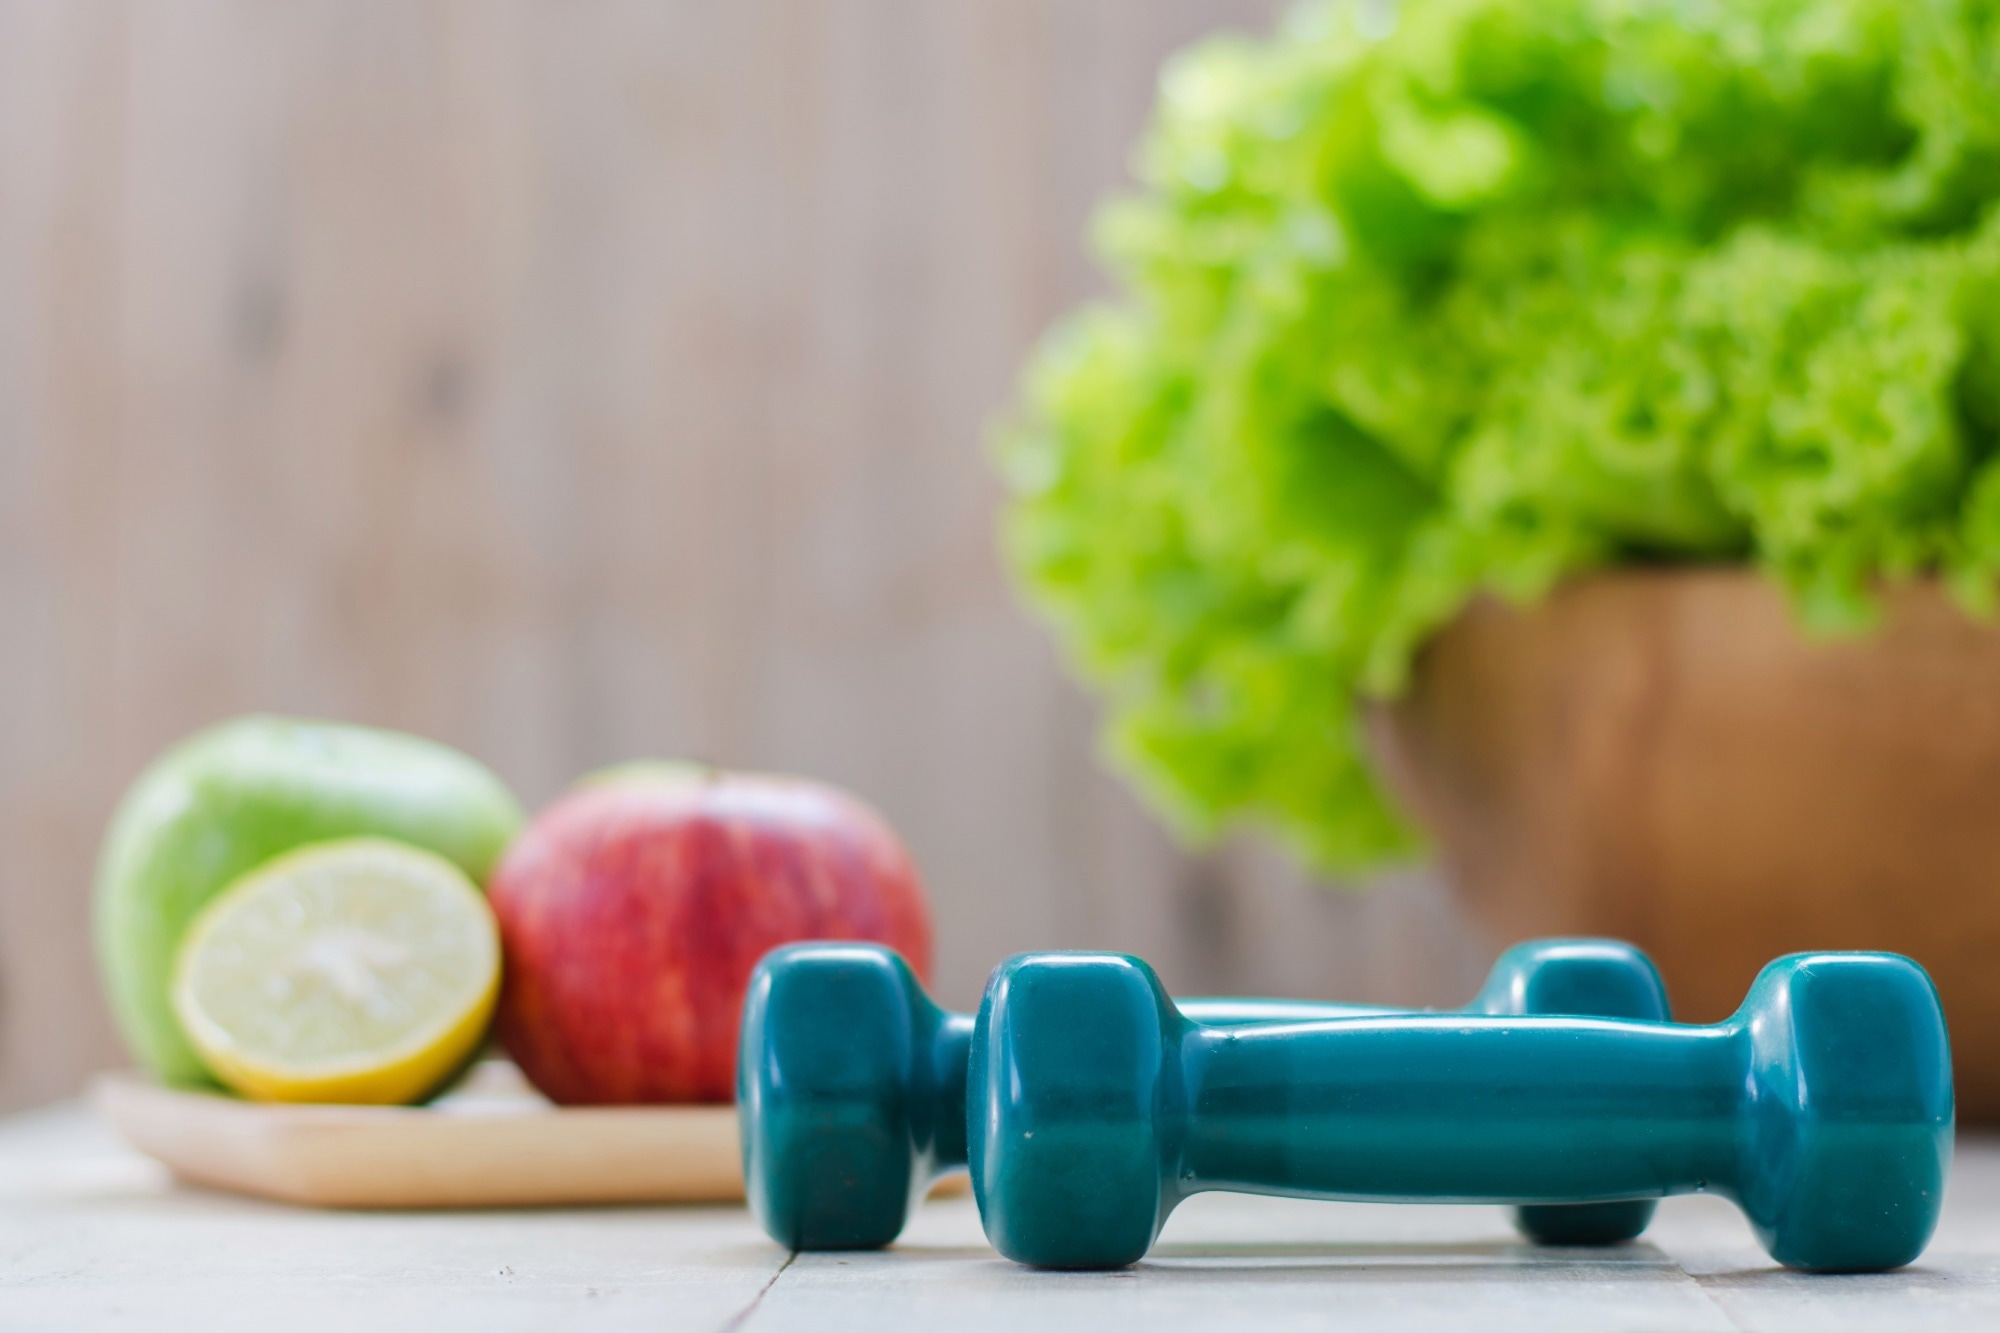 Study: Impact of Diet and Exercise Interventions on Cognition and Brain Health in Older Adults: A Narrative Review. Image Credit: Isarat / Shutterstock.com